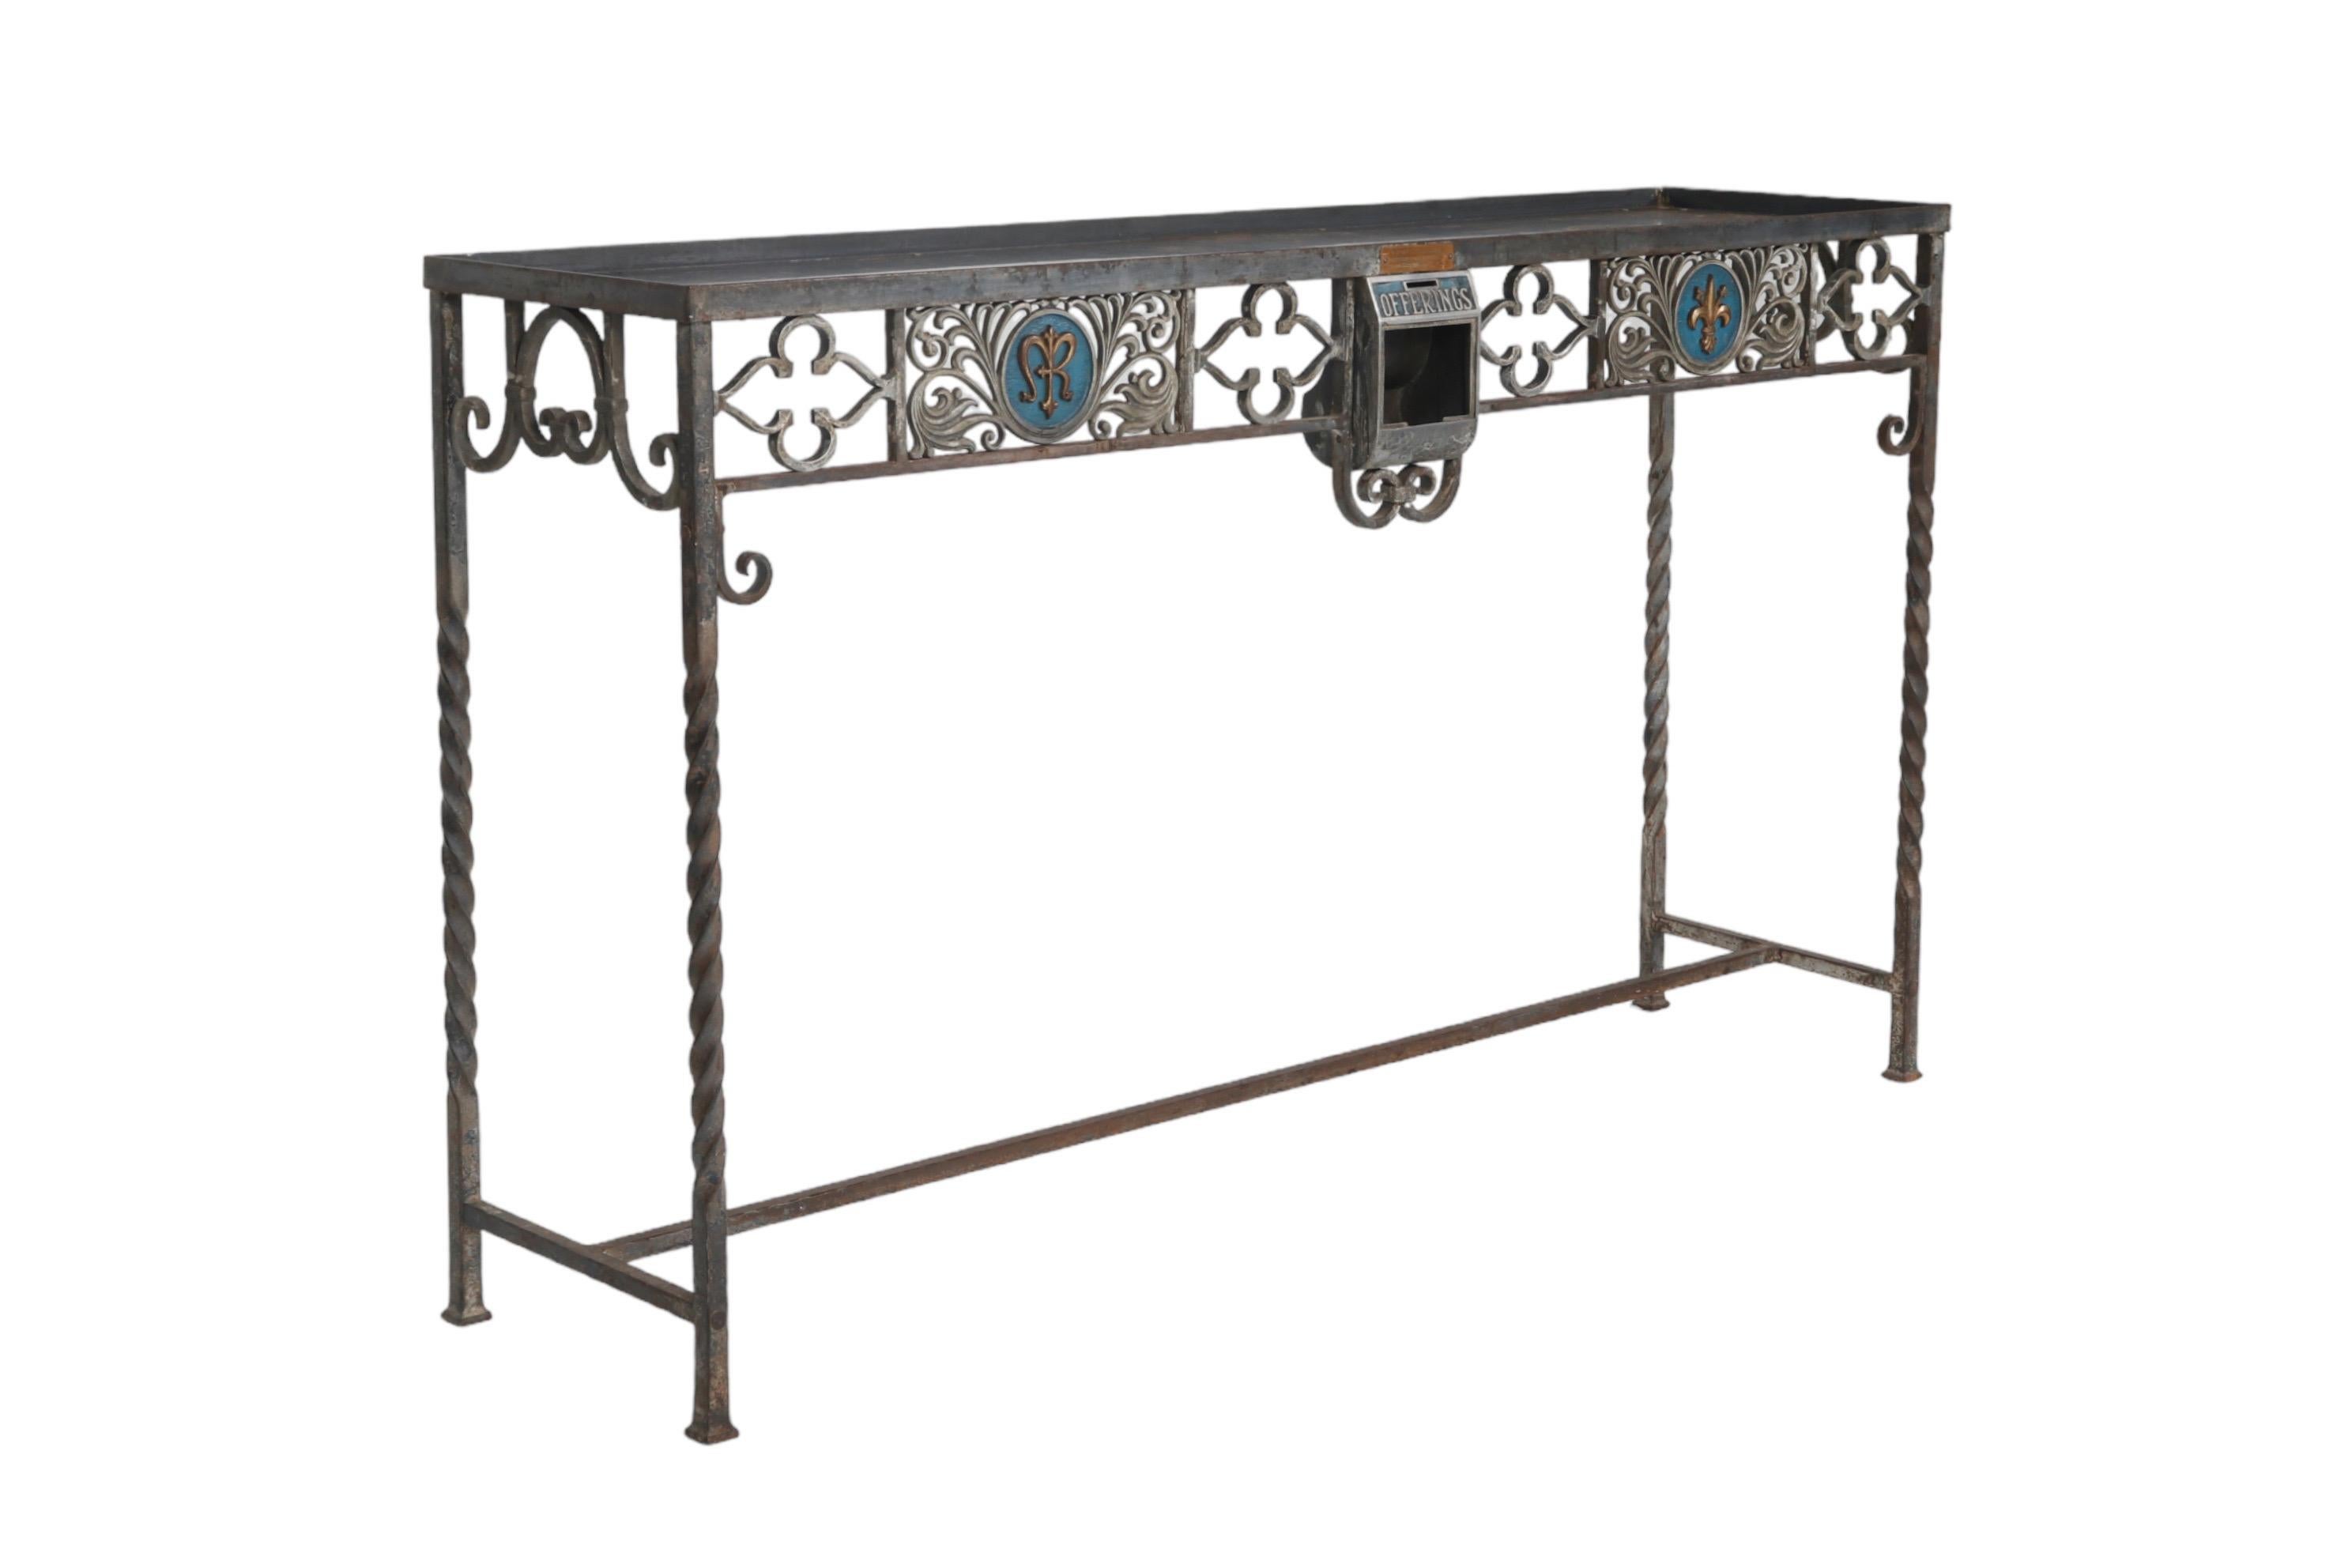 A custom made wrought iron console table with a tray-like top. An ornate skirt in front and at each side is decorated with loose flower shapes in wrought iron. Two pierced plates of acanthus scrolls have medallions in blue, pressed with a gilt fleur